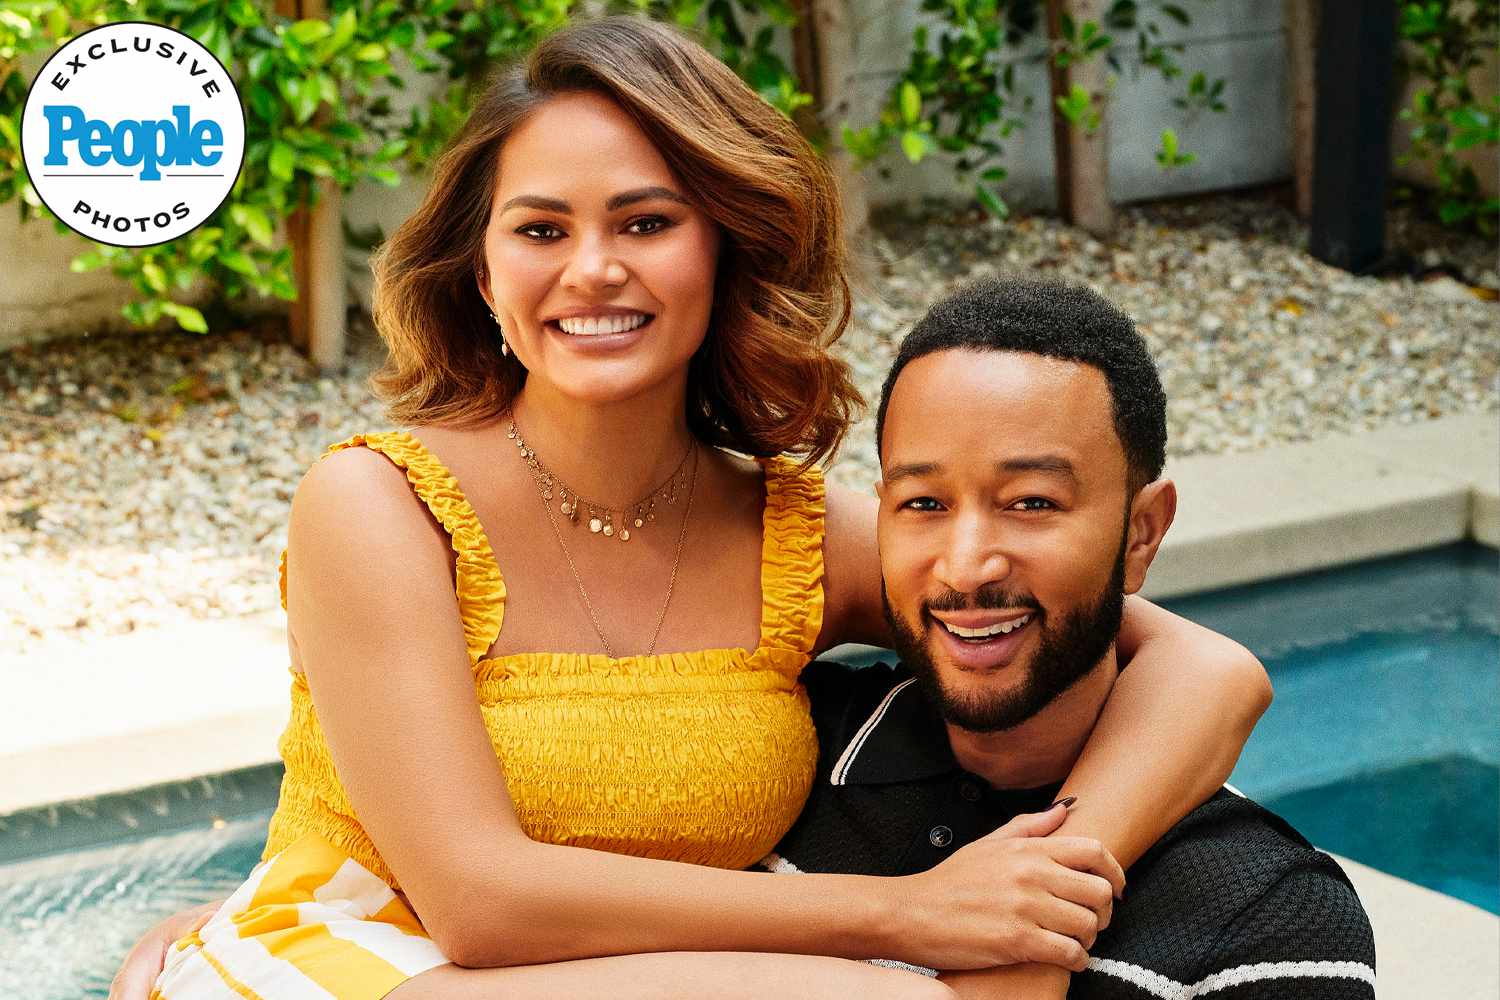 John Legend Talks 'Stealing' Chrissy Teigen’s Skincare Products and Their Kids' Changing Personalities (Exclusive)